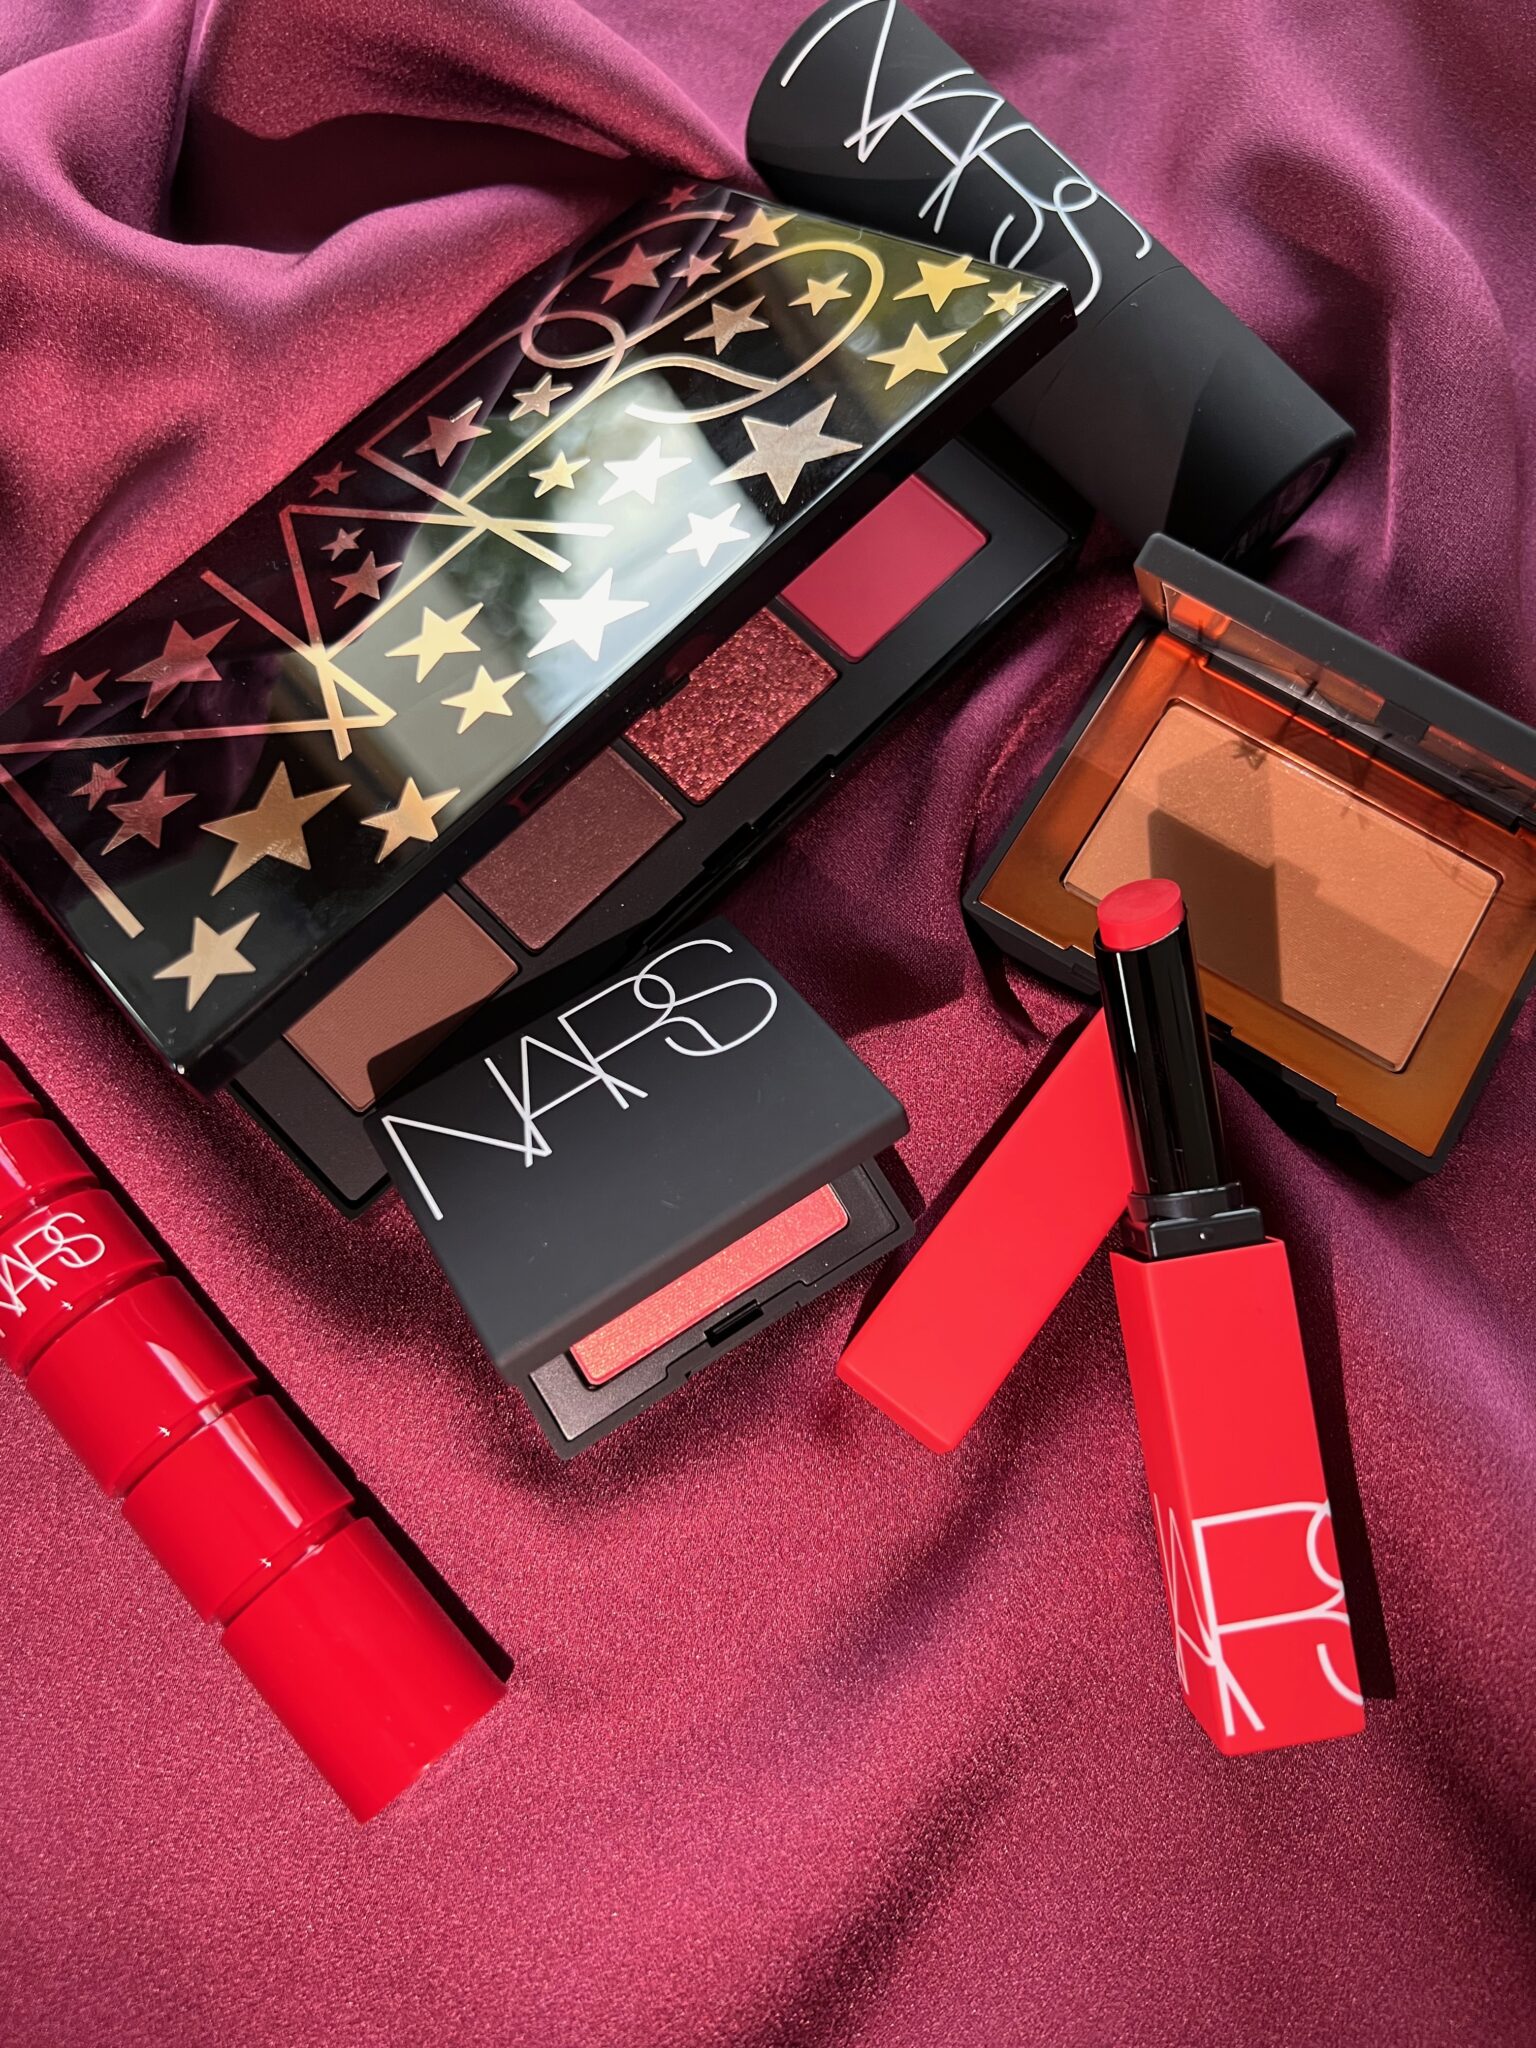 Christmas at Sephora - Top Holiday 2022 Gift Sets For Women. Nars, Sephora, Benefit and more. 4